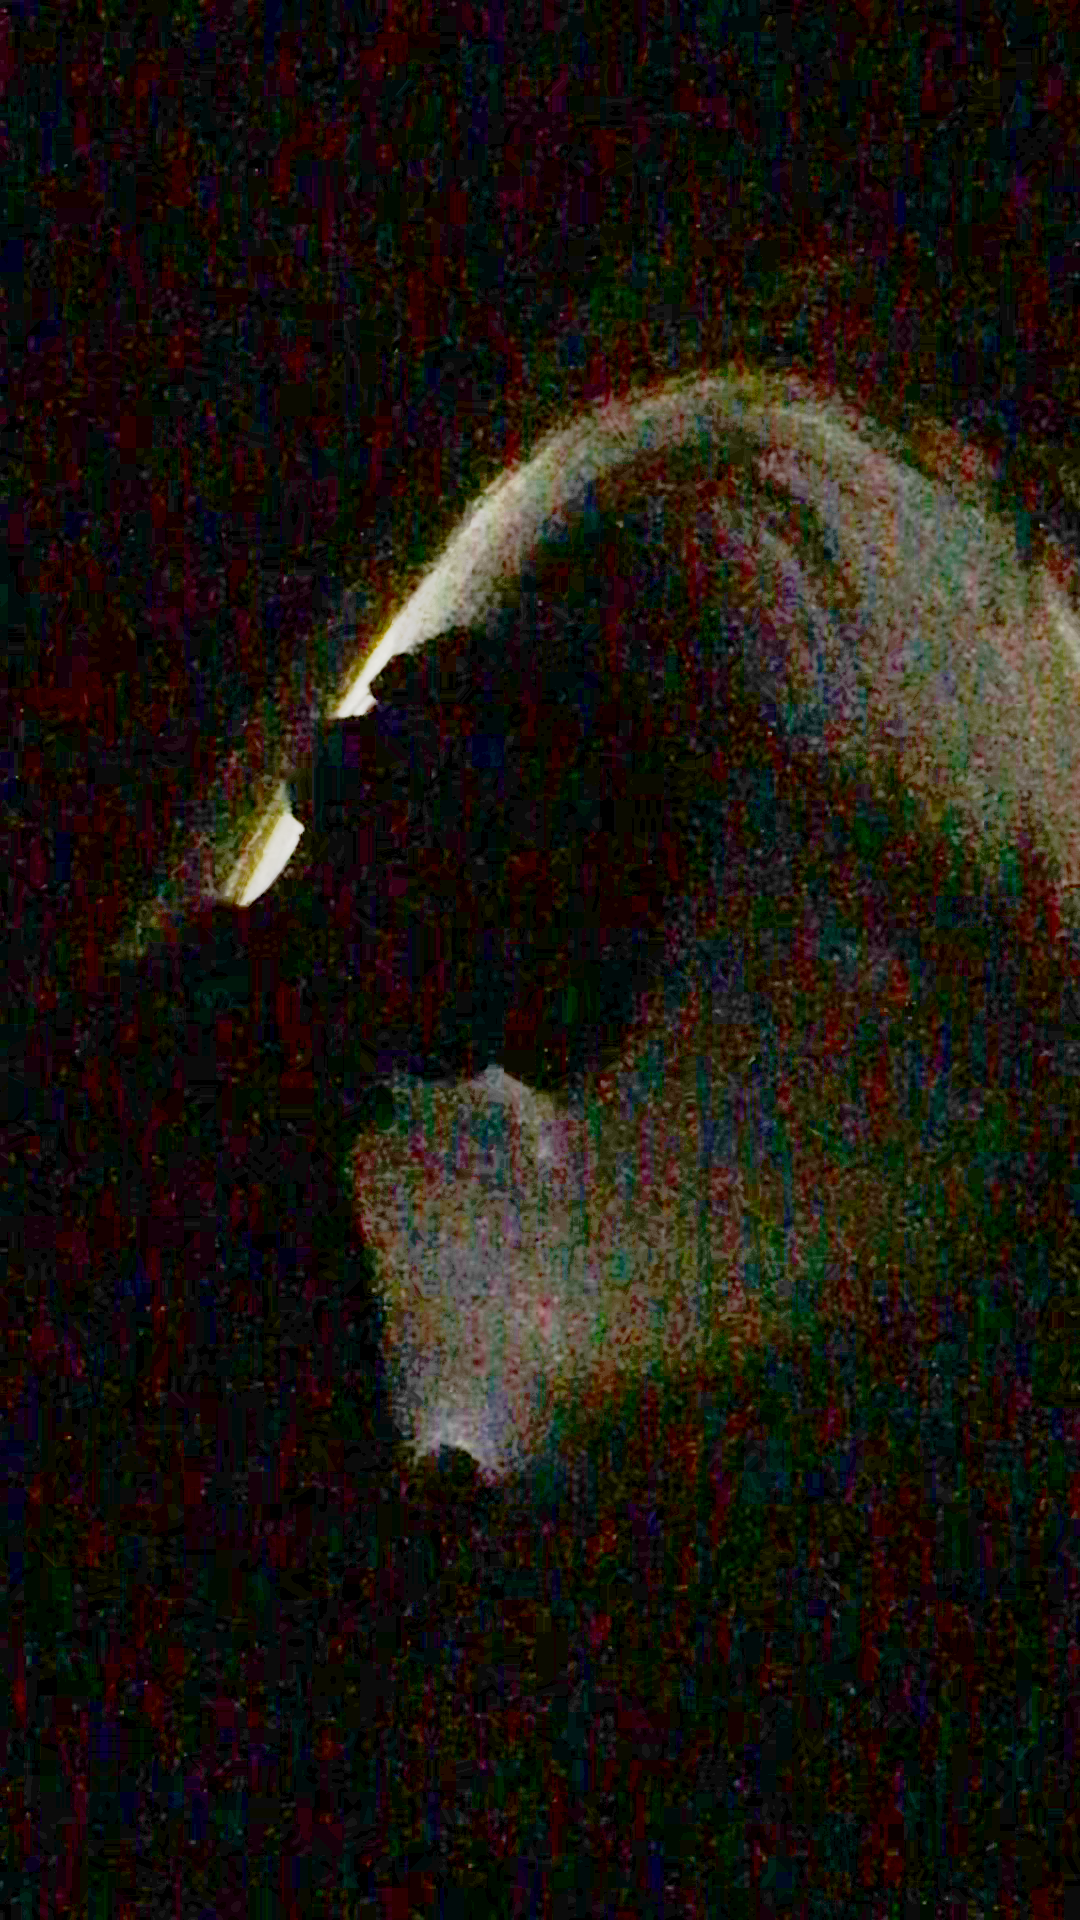 A low-fi photo of a person silhouette in a tunnel holding a light